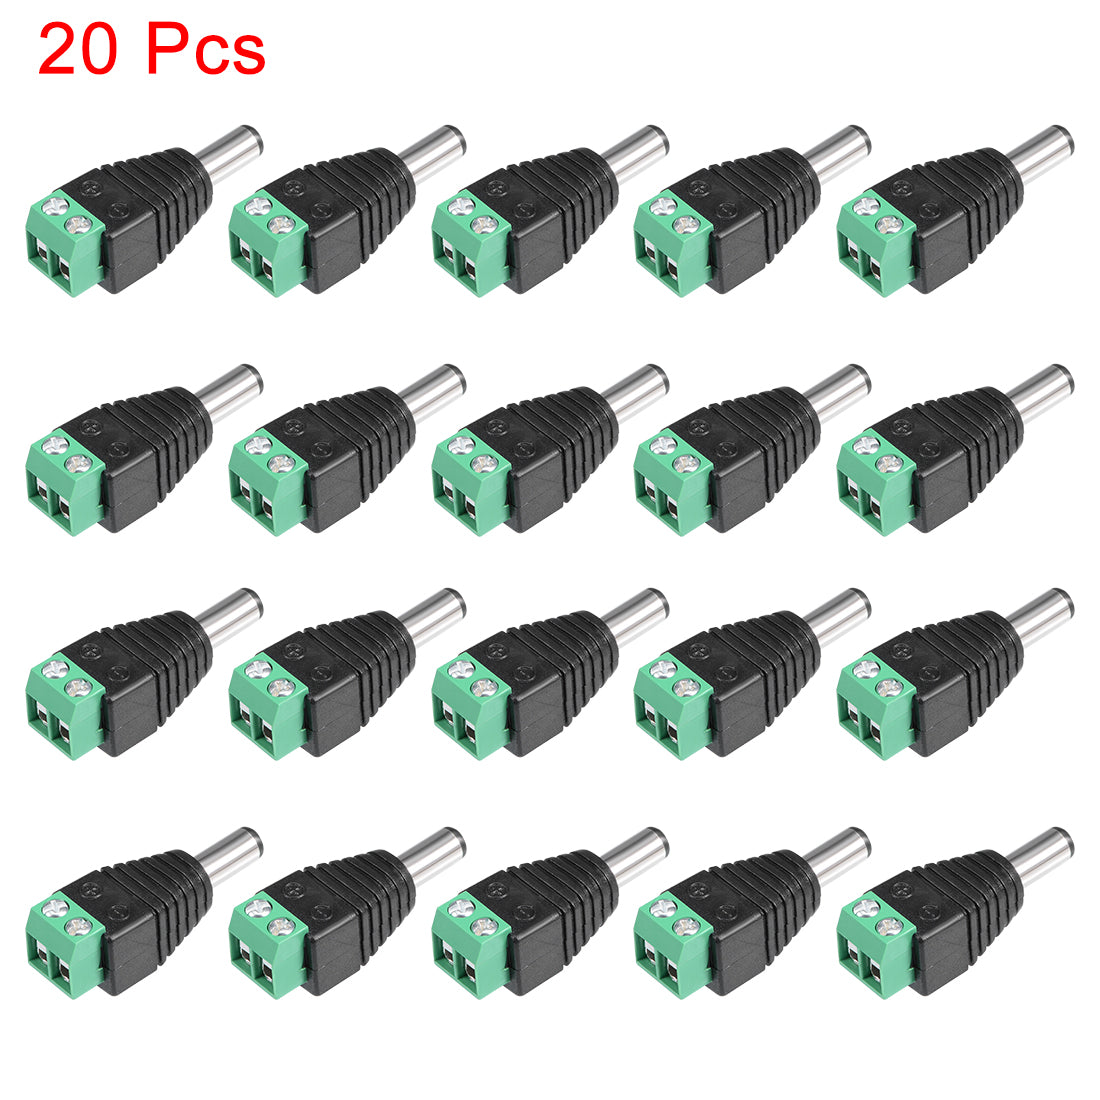 uxcell Uxcell DC Male Connector 5.5x2.1mm Power Jack Adapter 20Pcs for Led Strip CCTV Security Camera Cable Wire Ends